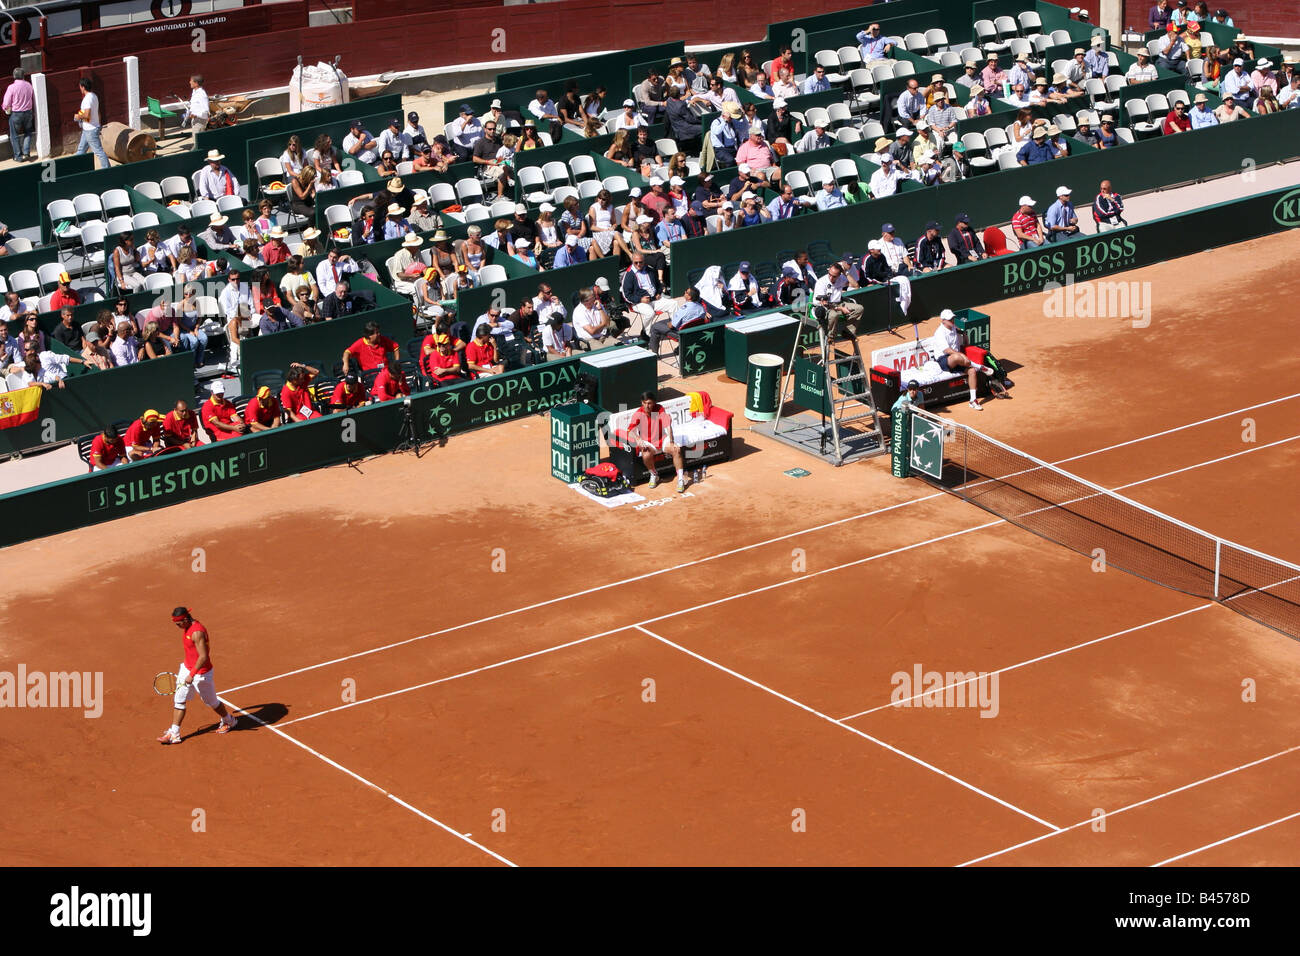 View of the tennis court set up in the Plaza de Toros de las Ventas,  Madrid, for the semifinal tie of Davis Cup. Nadal playing Stock Photo -  Alamy